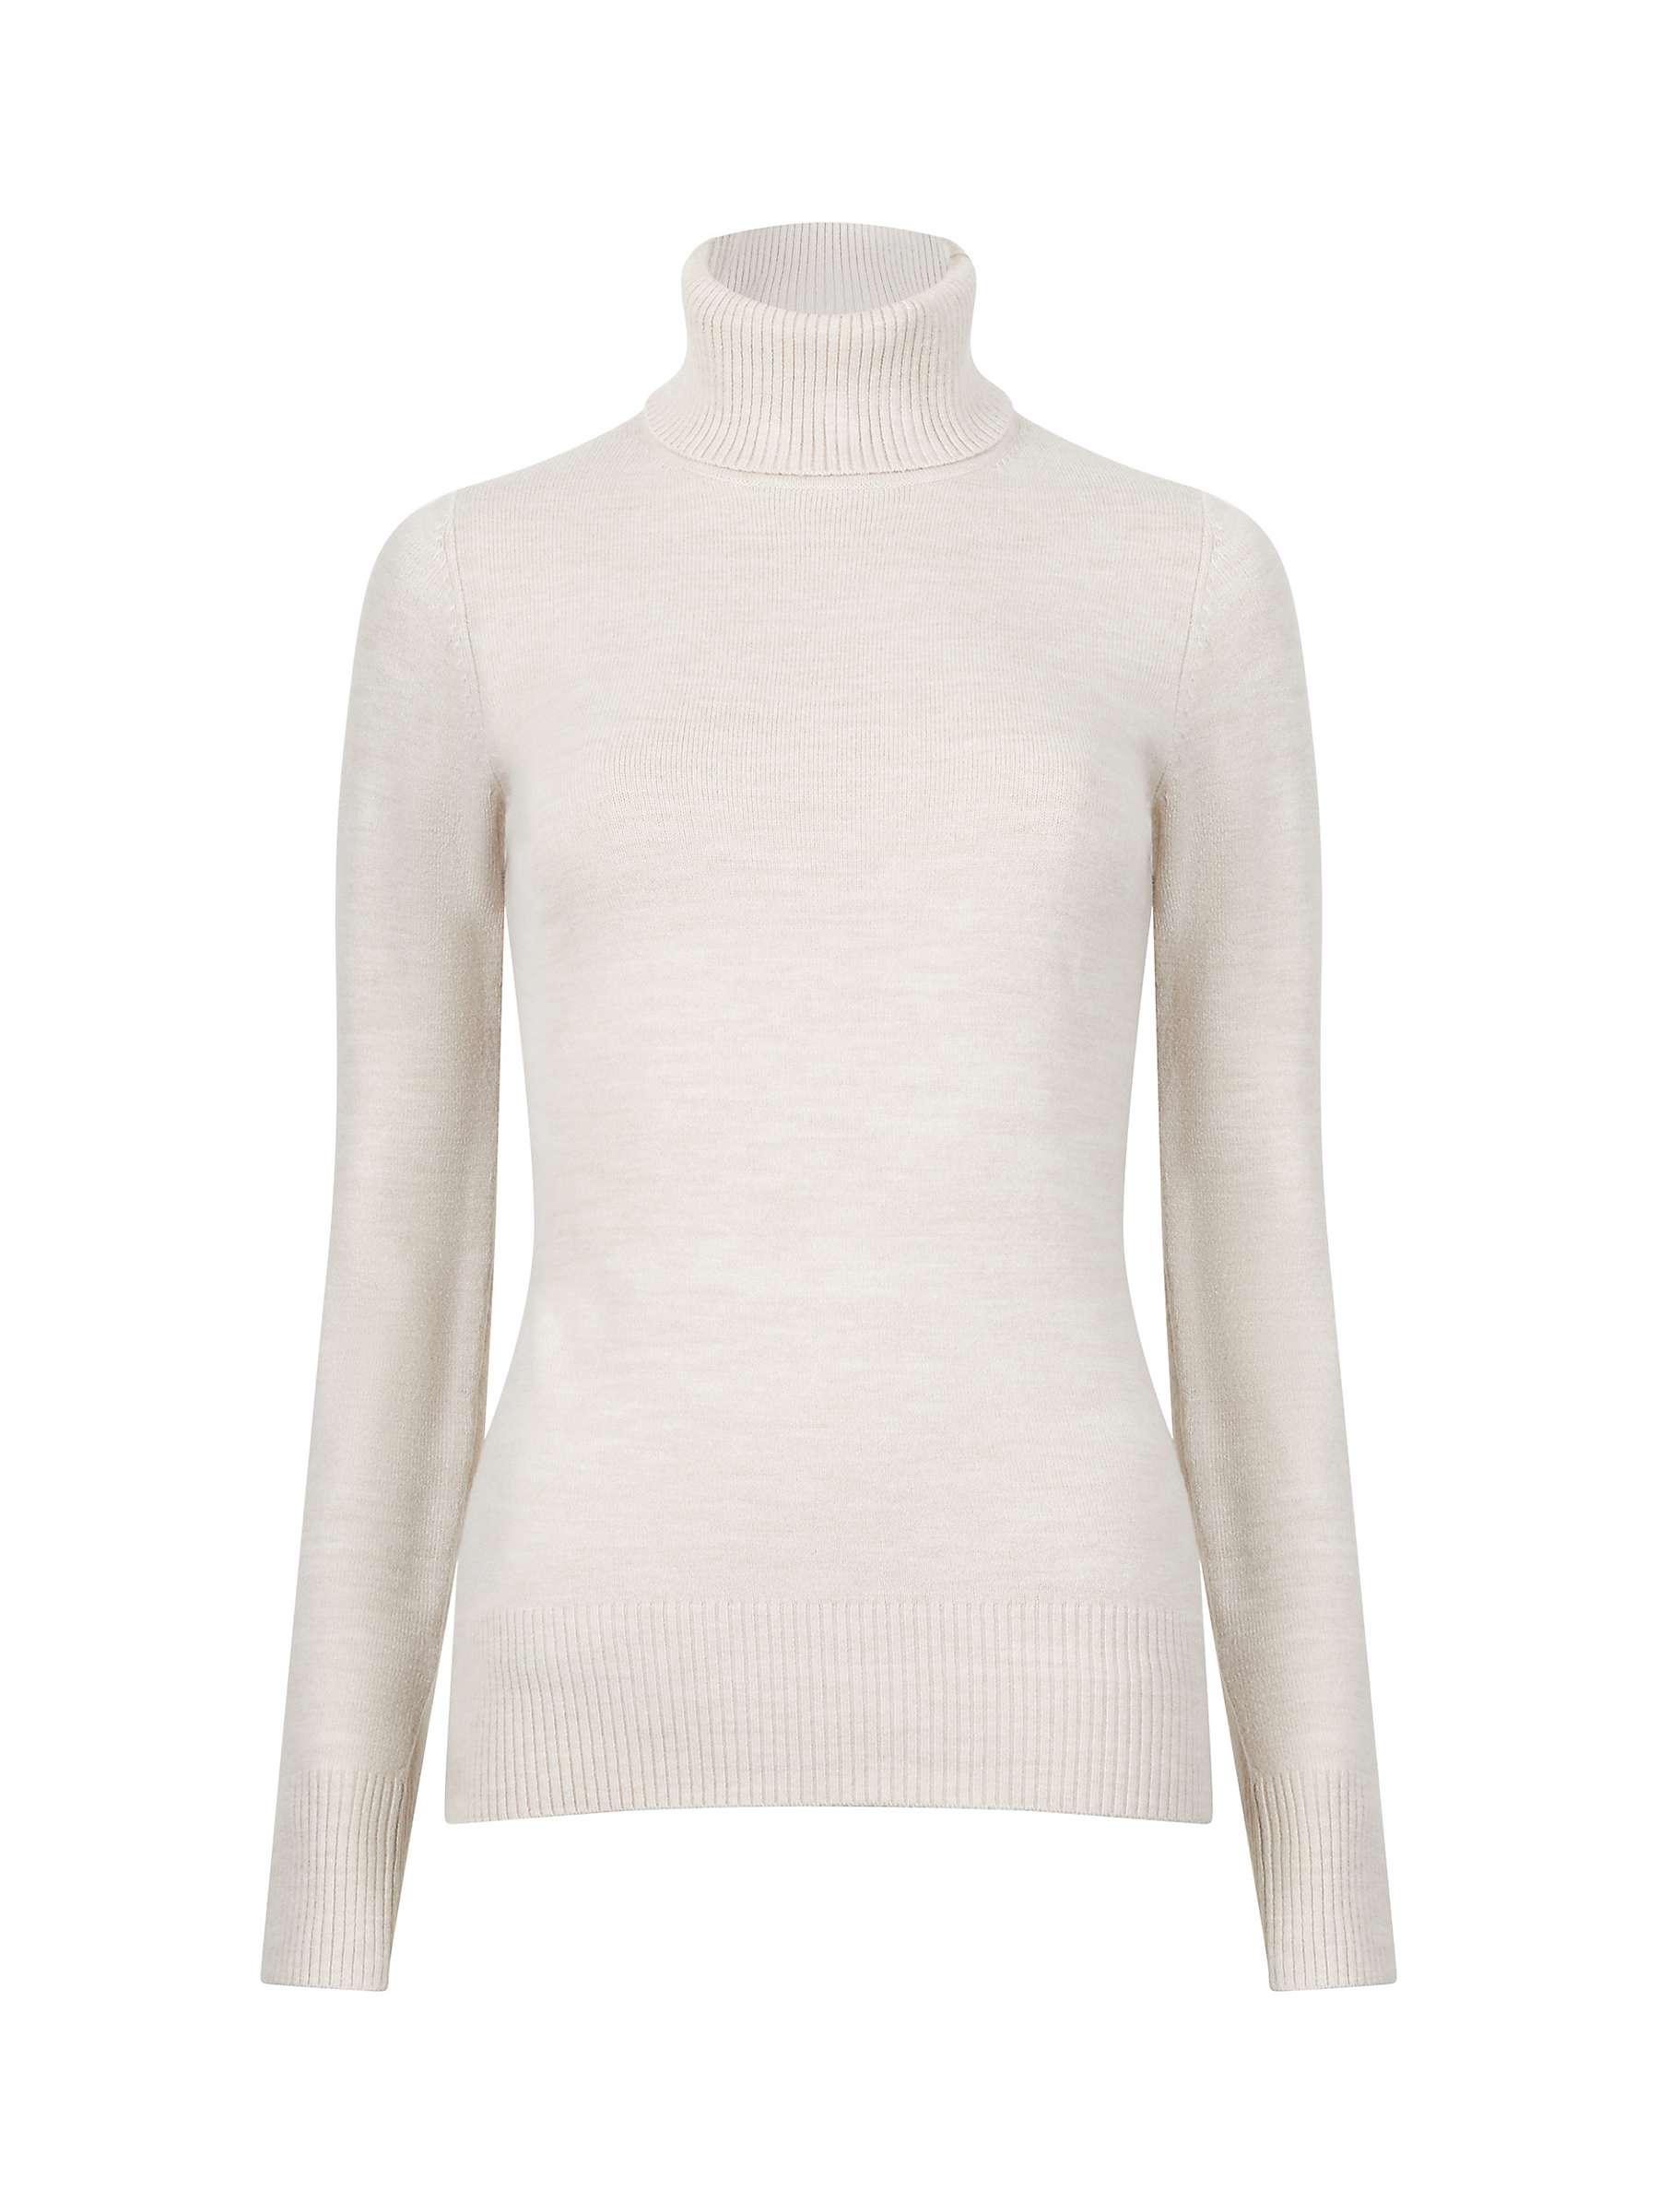 French Connection Babysoft Roll Neck Jumper, Oatmeal at John Lewis ...